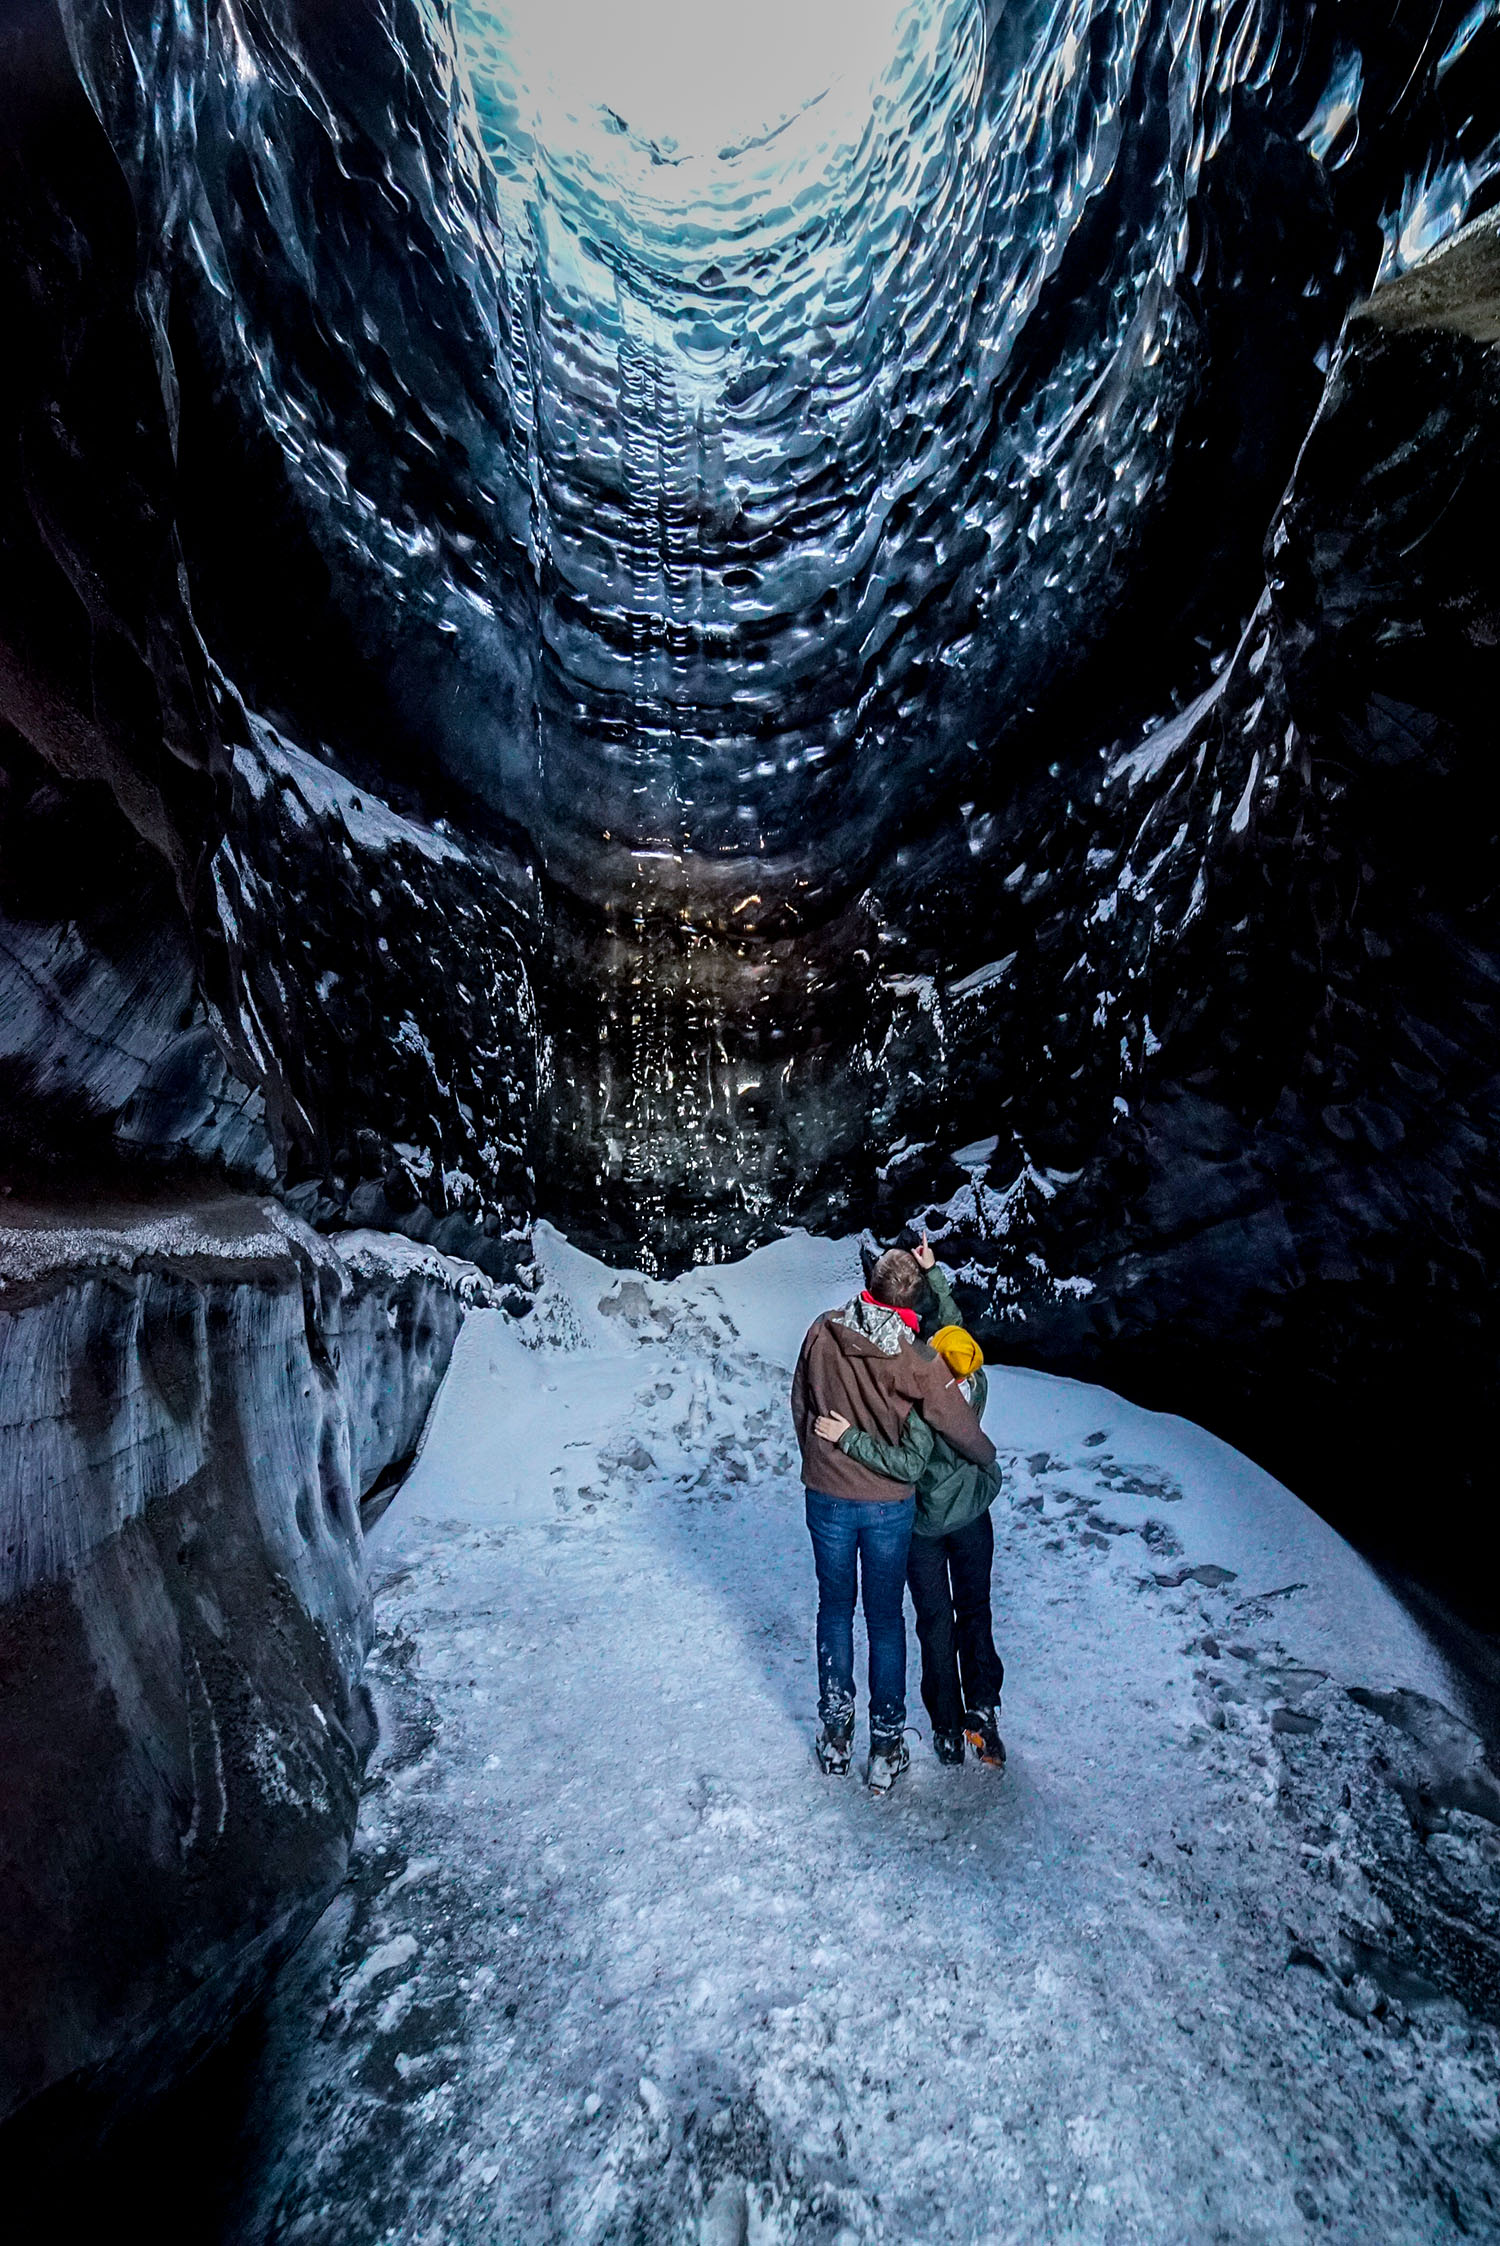 The Ice Cave Beneath the Volcano - Meet on Location in Vik